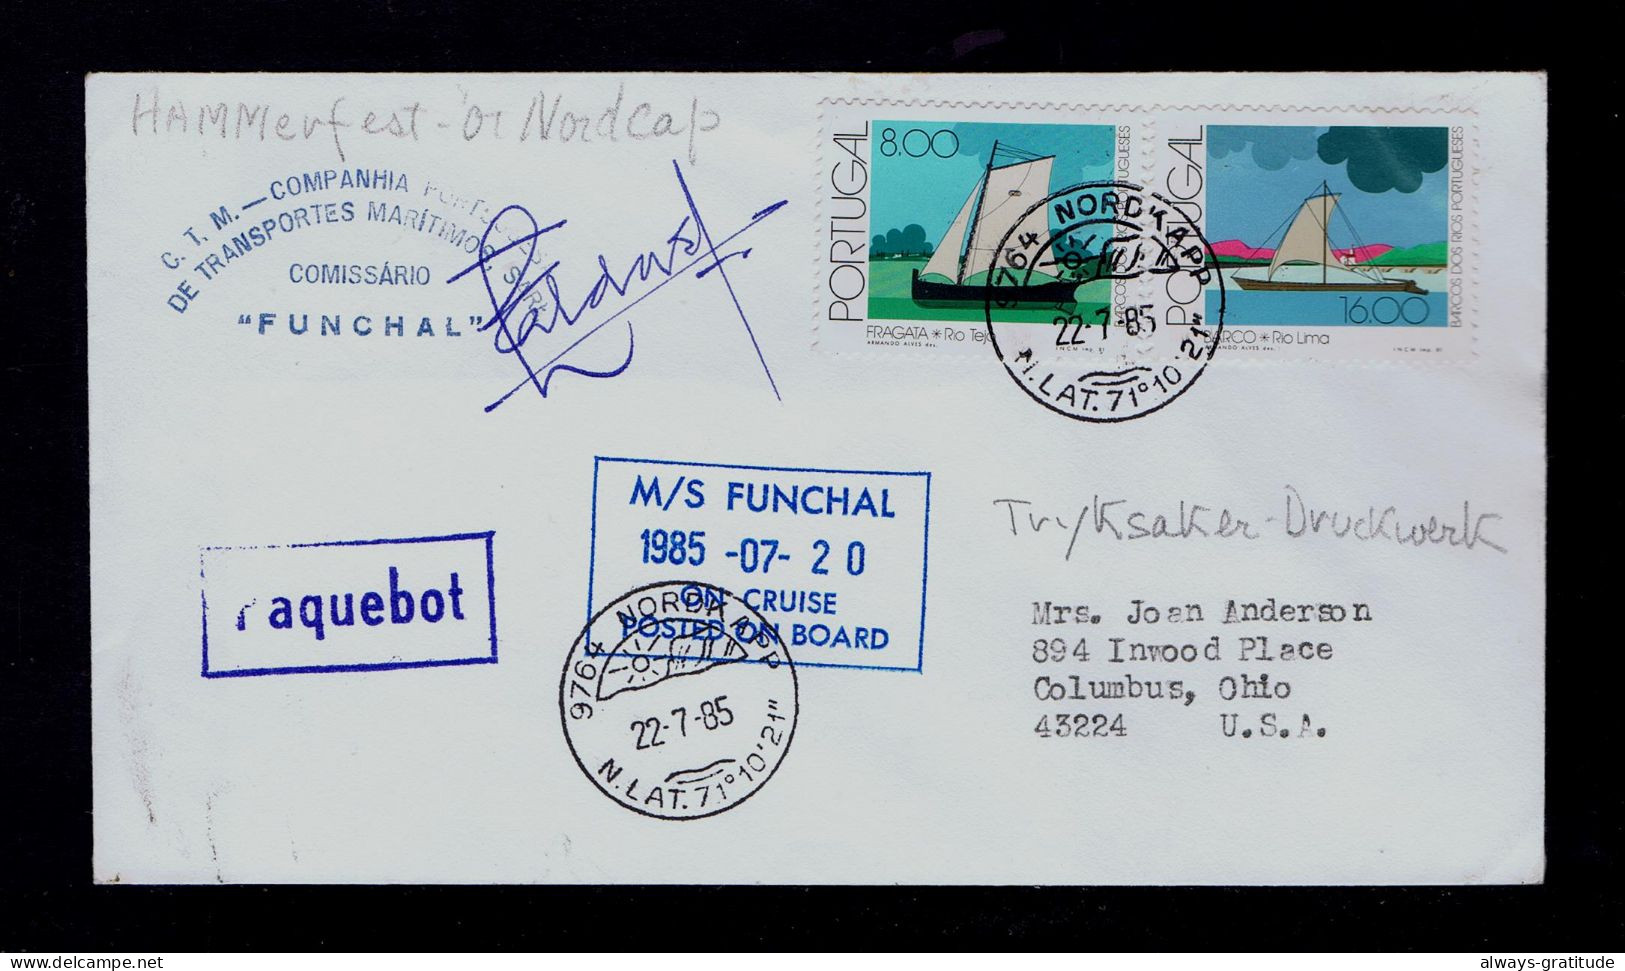 Sp10539 MADEIRA Island (FUNCHAL 1985 Posted On Board /cruise) Paquebot Portugal Mailed Ohio -US - Other (Sea)